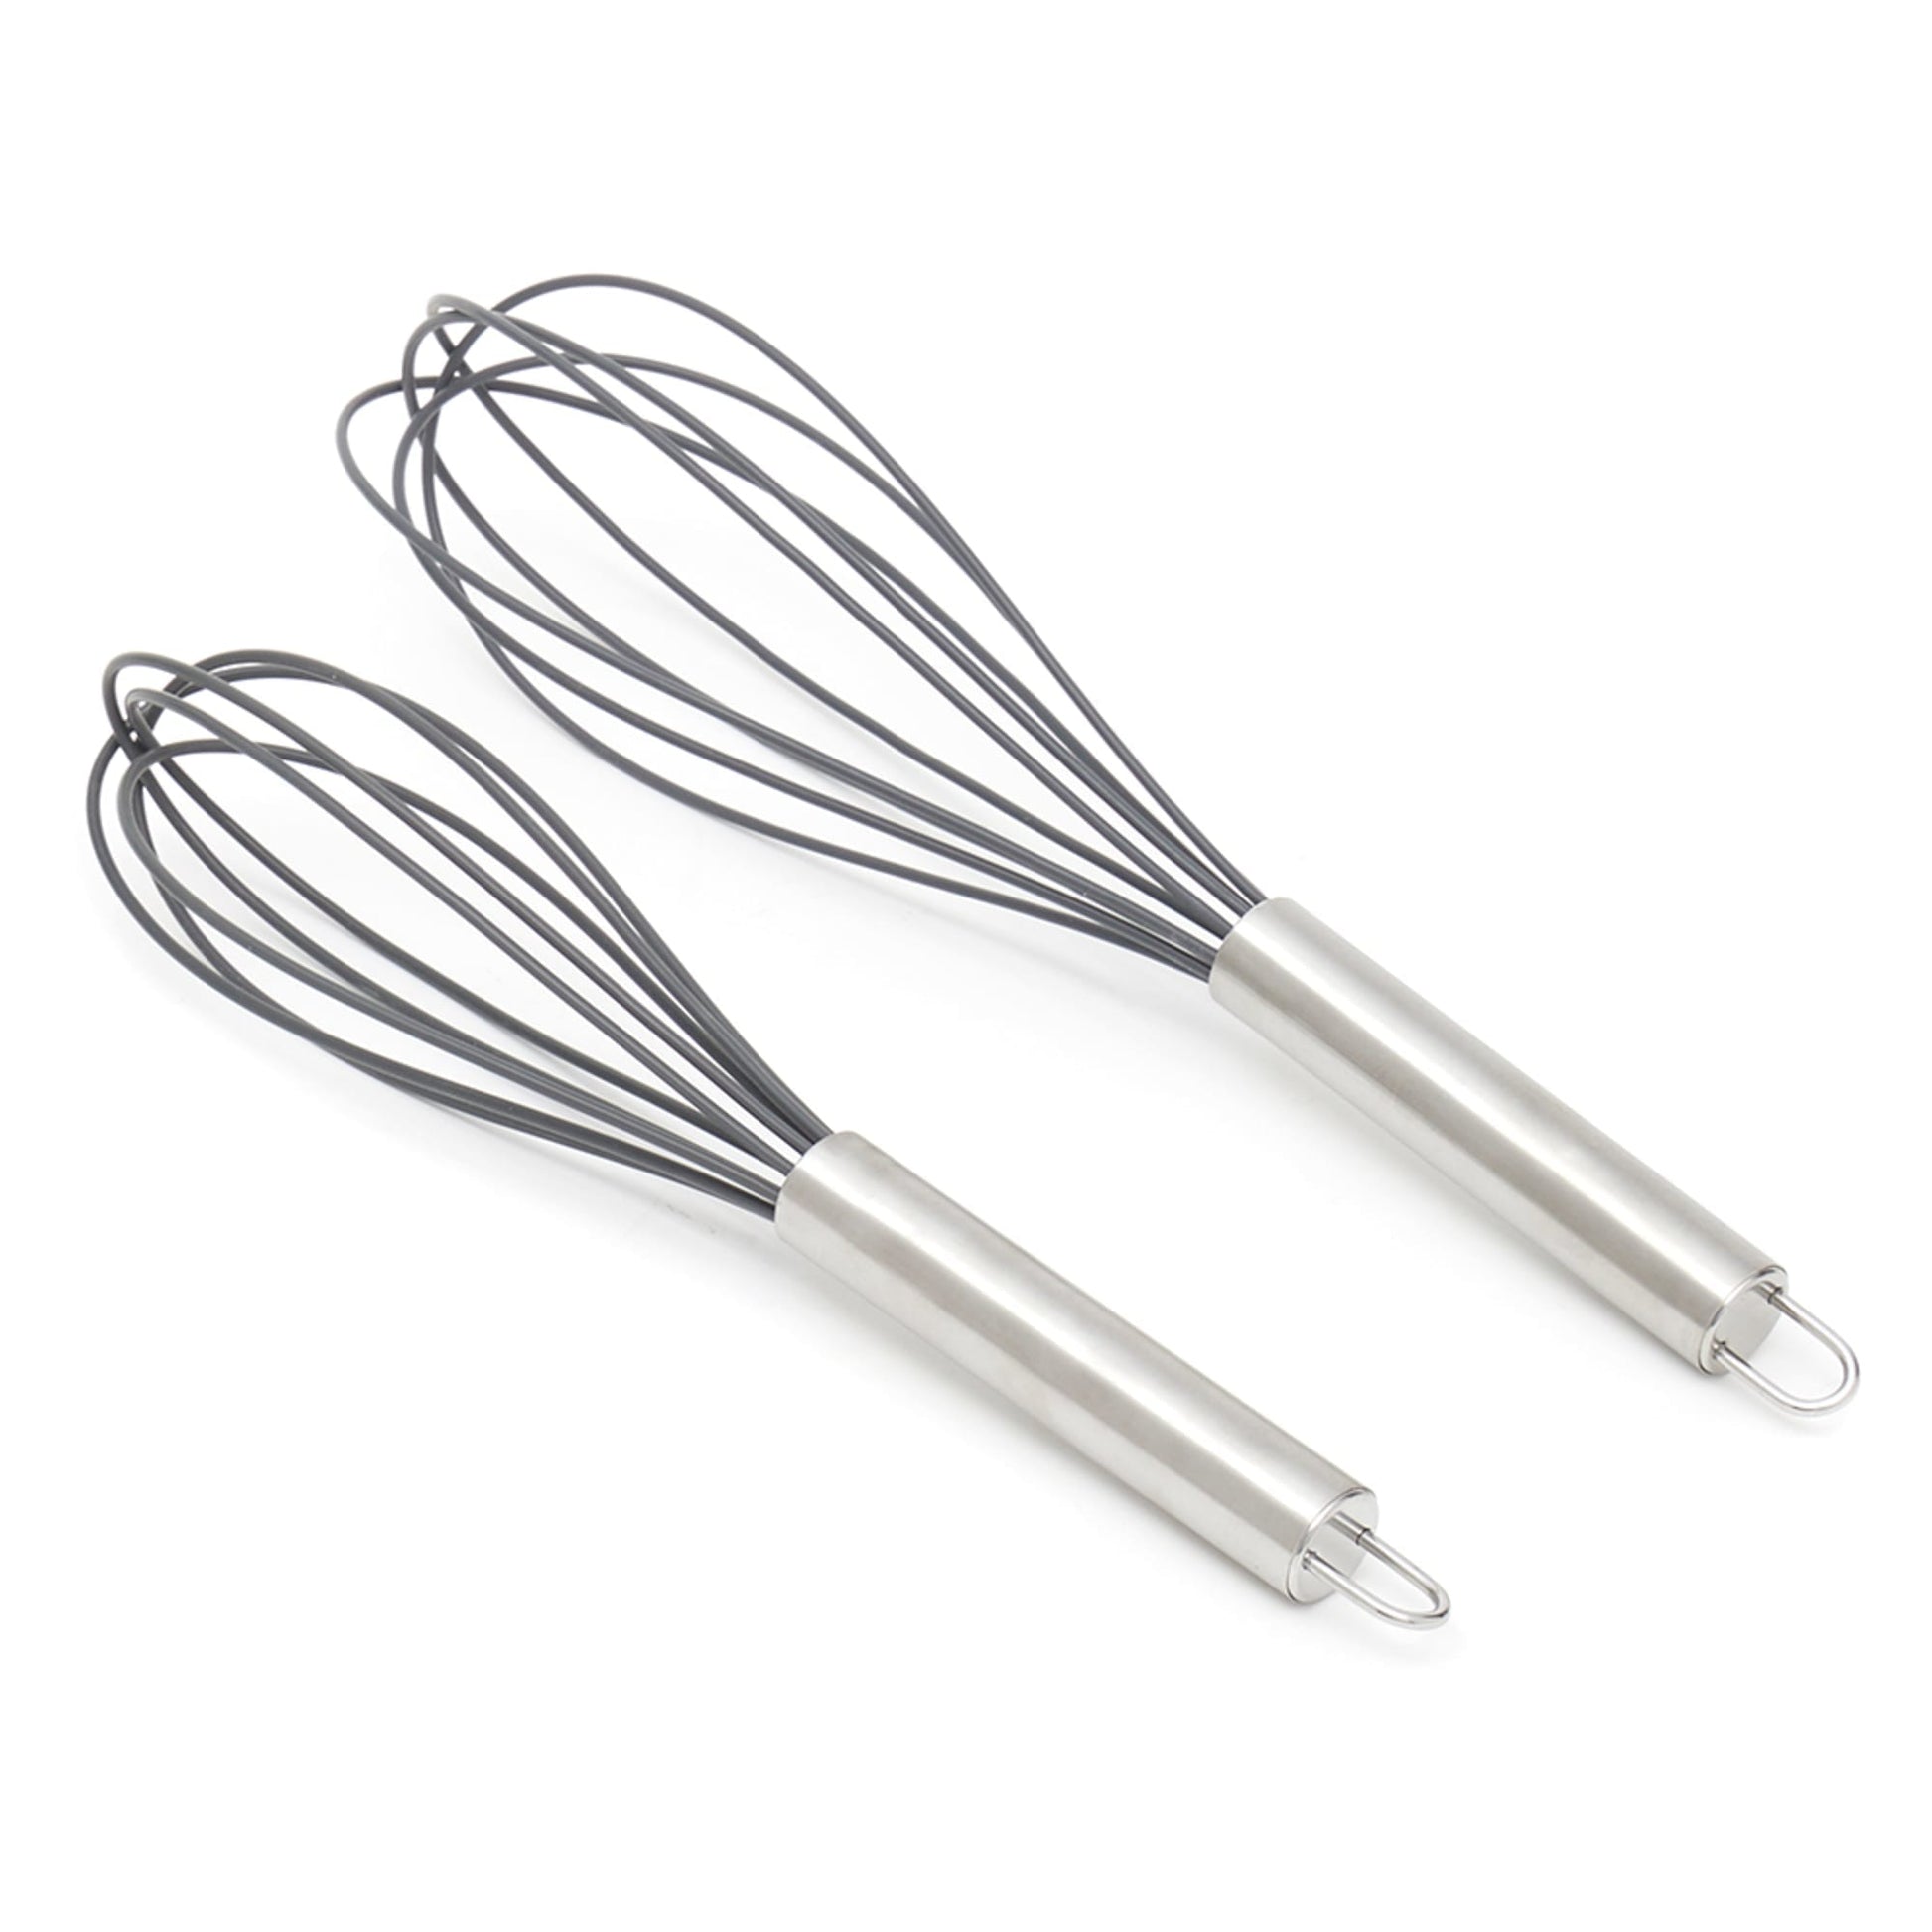  StarPack Basics Silicone Whisks for Cooking - Whisk Silicone  Material with High Heat Resistance of 480°F - Non-Stick Kitchen Whisk for  Cooking, Baking & Stirring - Durable Rubber Whisk (Gray Black)